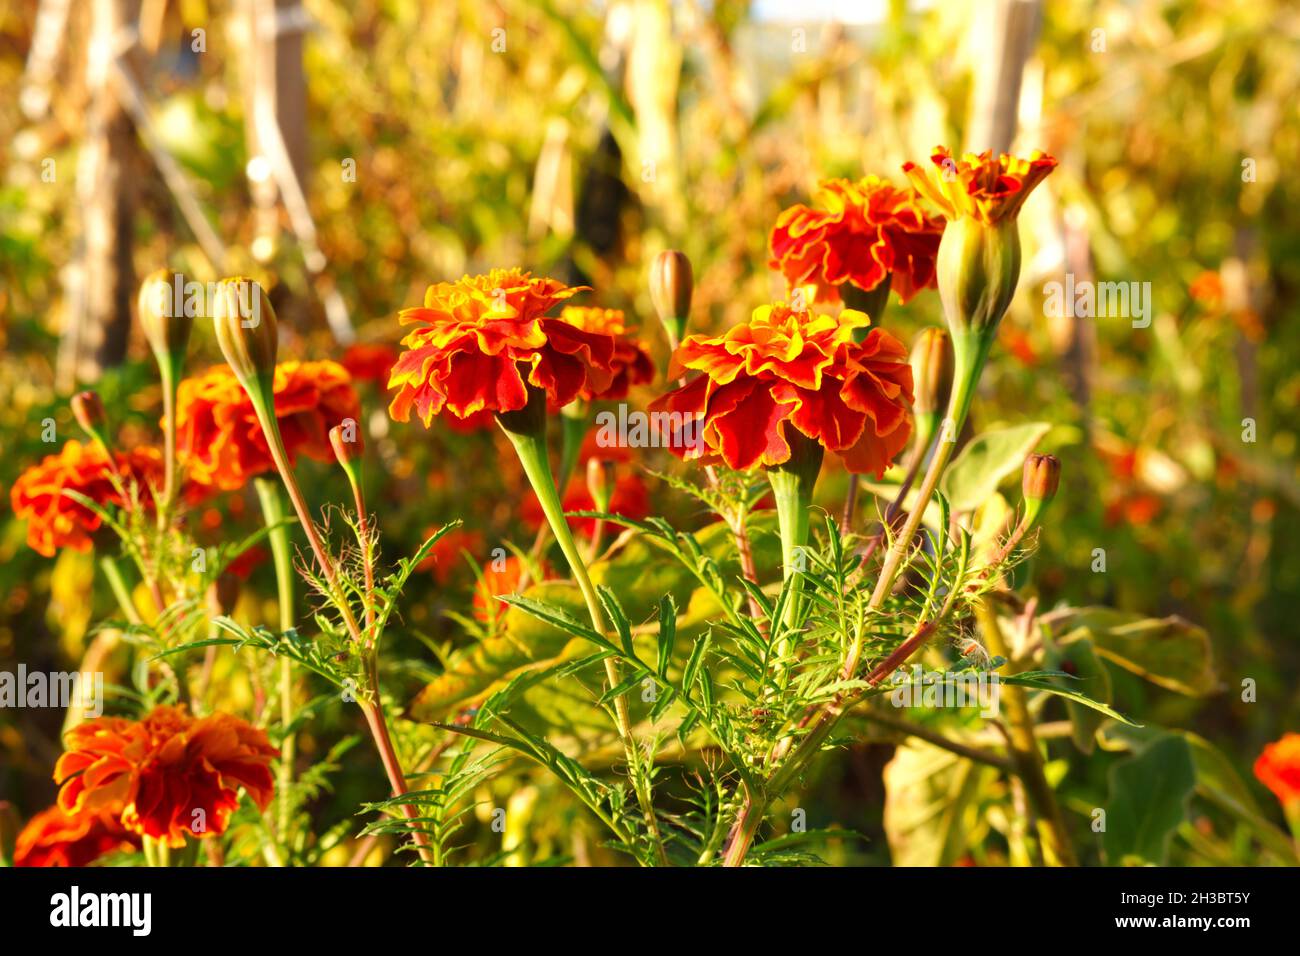 Orange Marigold Flower Bookeh Photo at a Sunny Day Outdoor Stock Photo